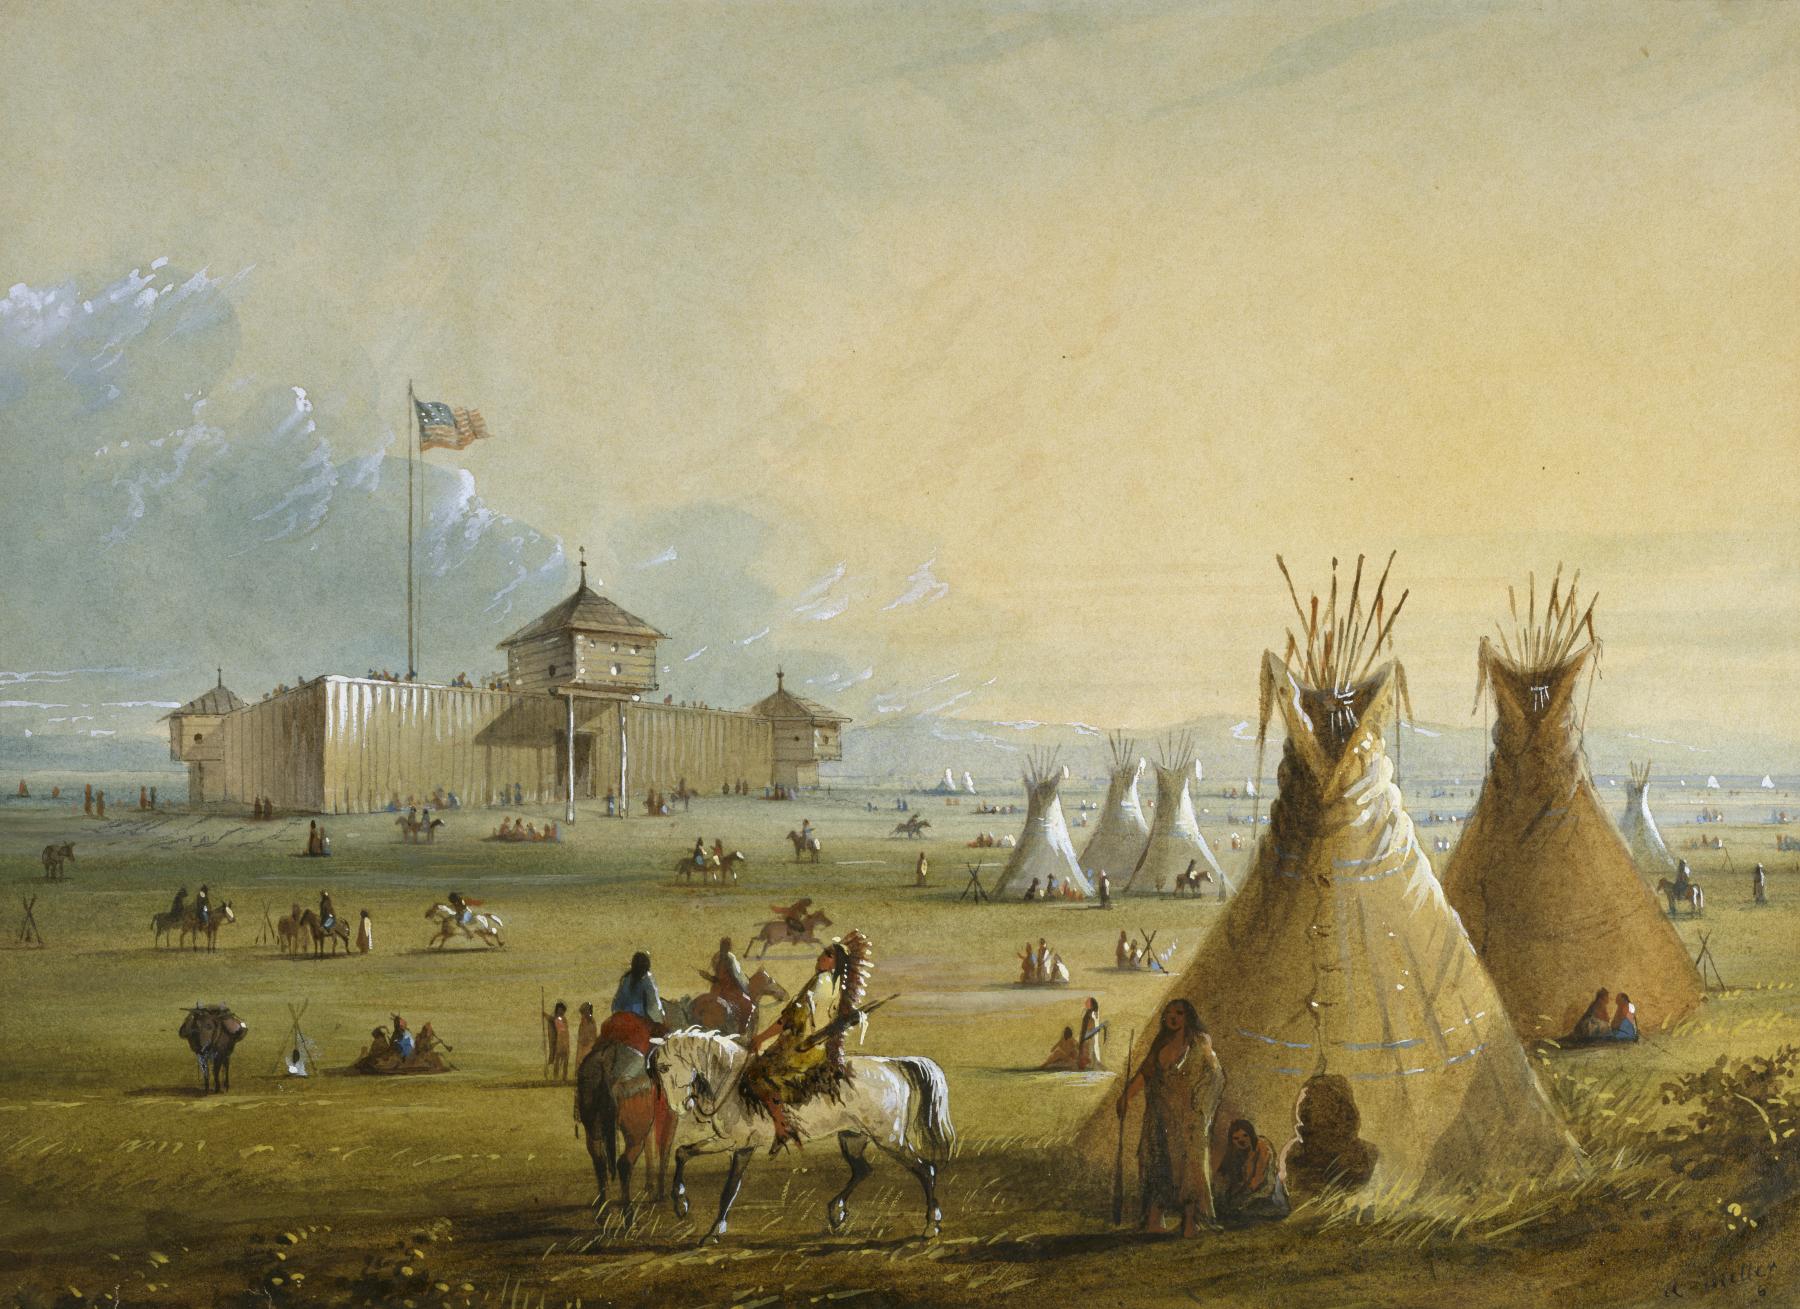 Alfred Jacob Miller produced this painting of Fort William/Public domain